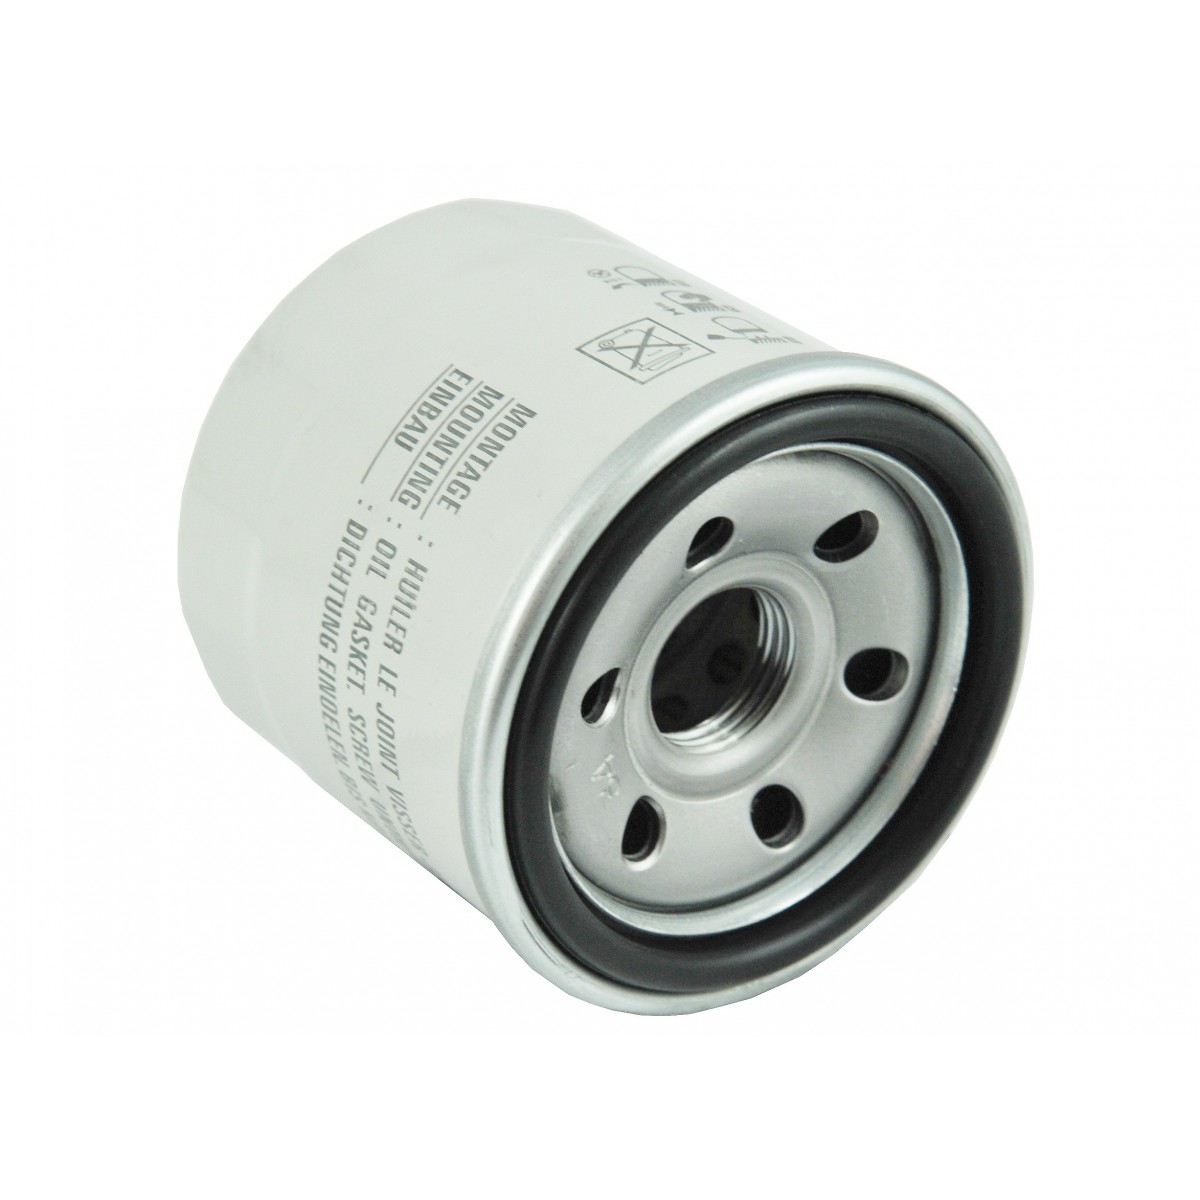 64x68mm 3/4 "-16UNF Engine Oil Filter